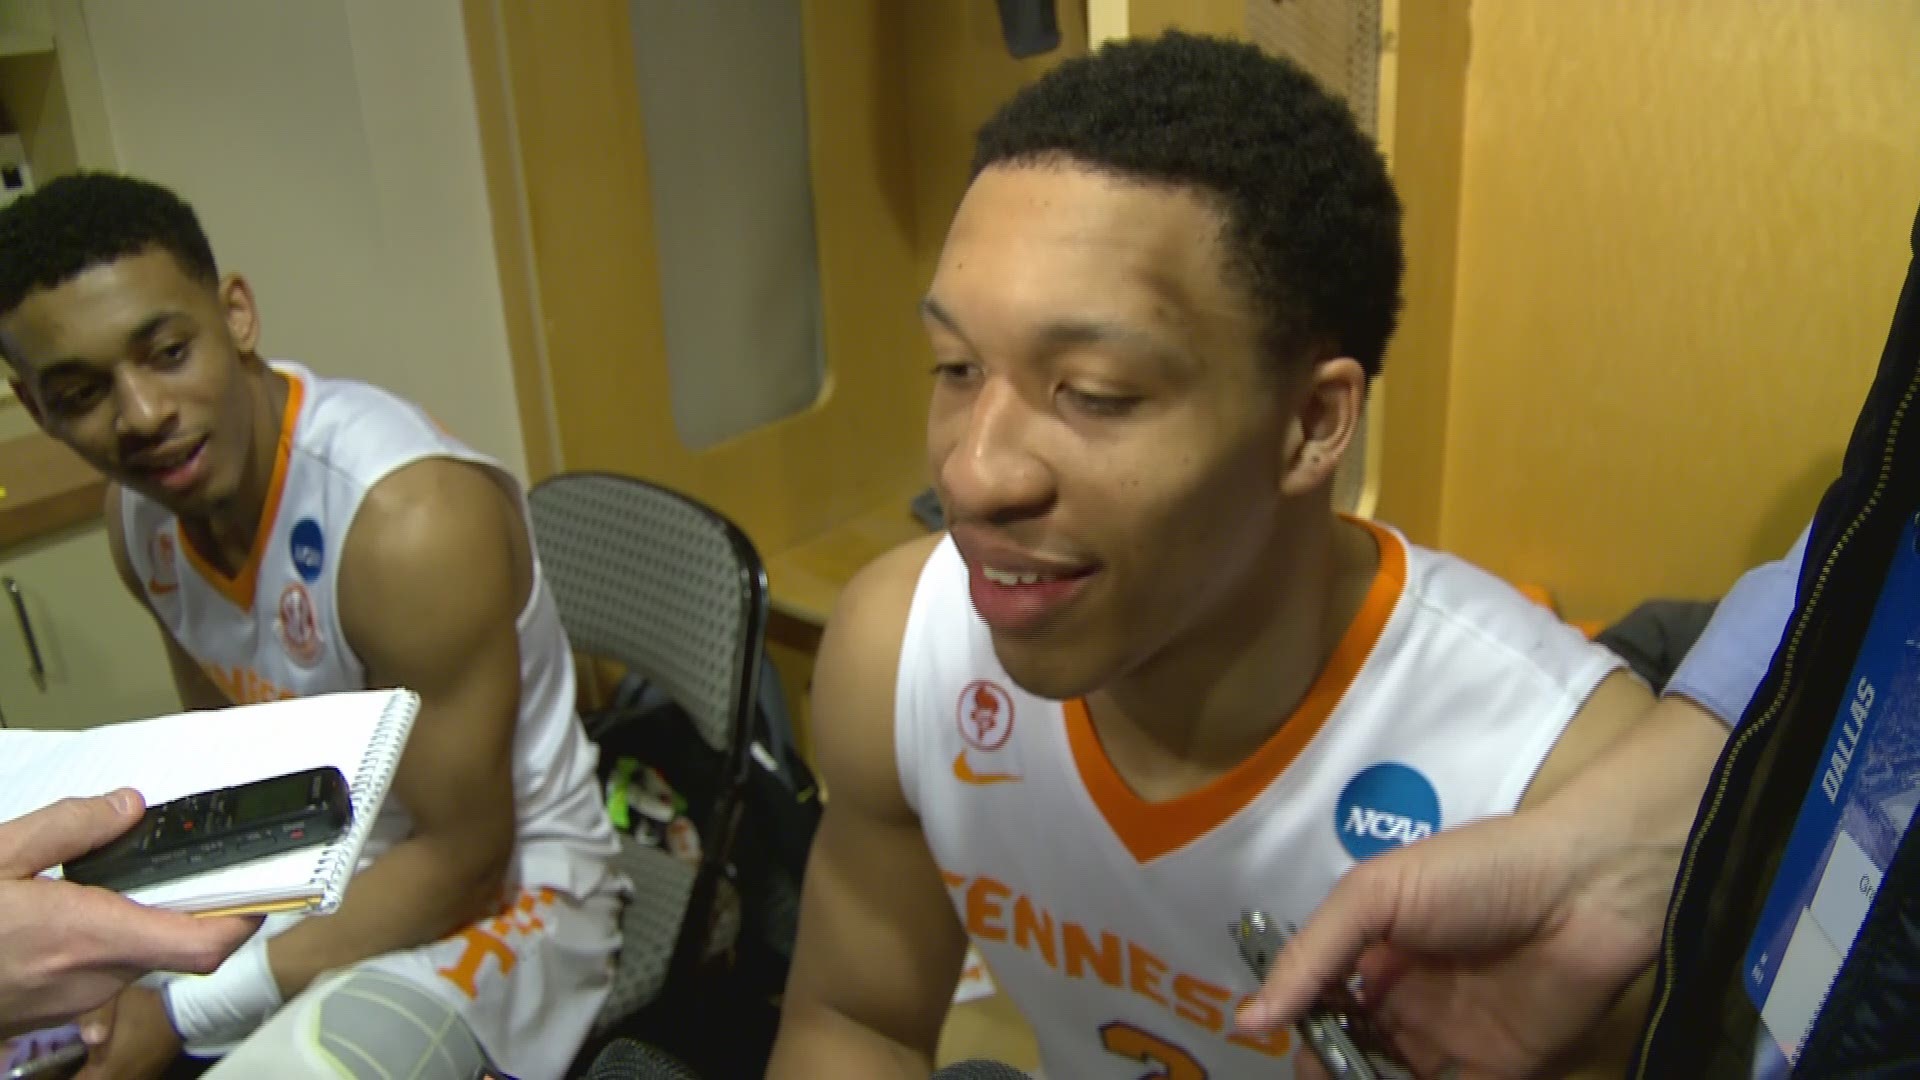 Grant Williams scored 14 points and pulled down 9 rebounds in Tennessee's NCAA Tournament first round win.